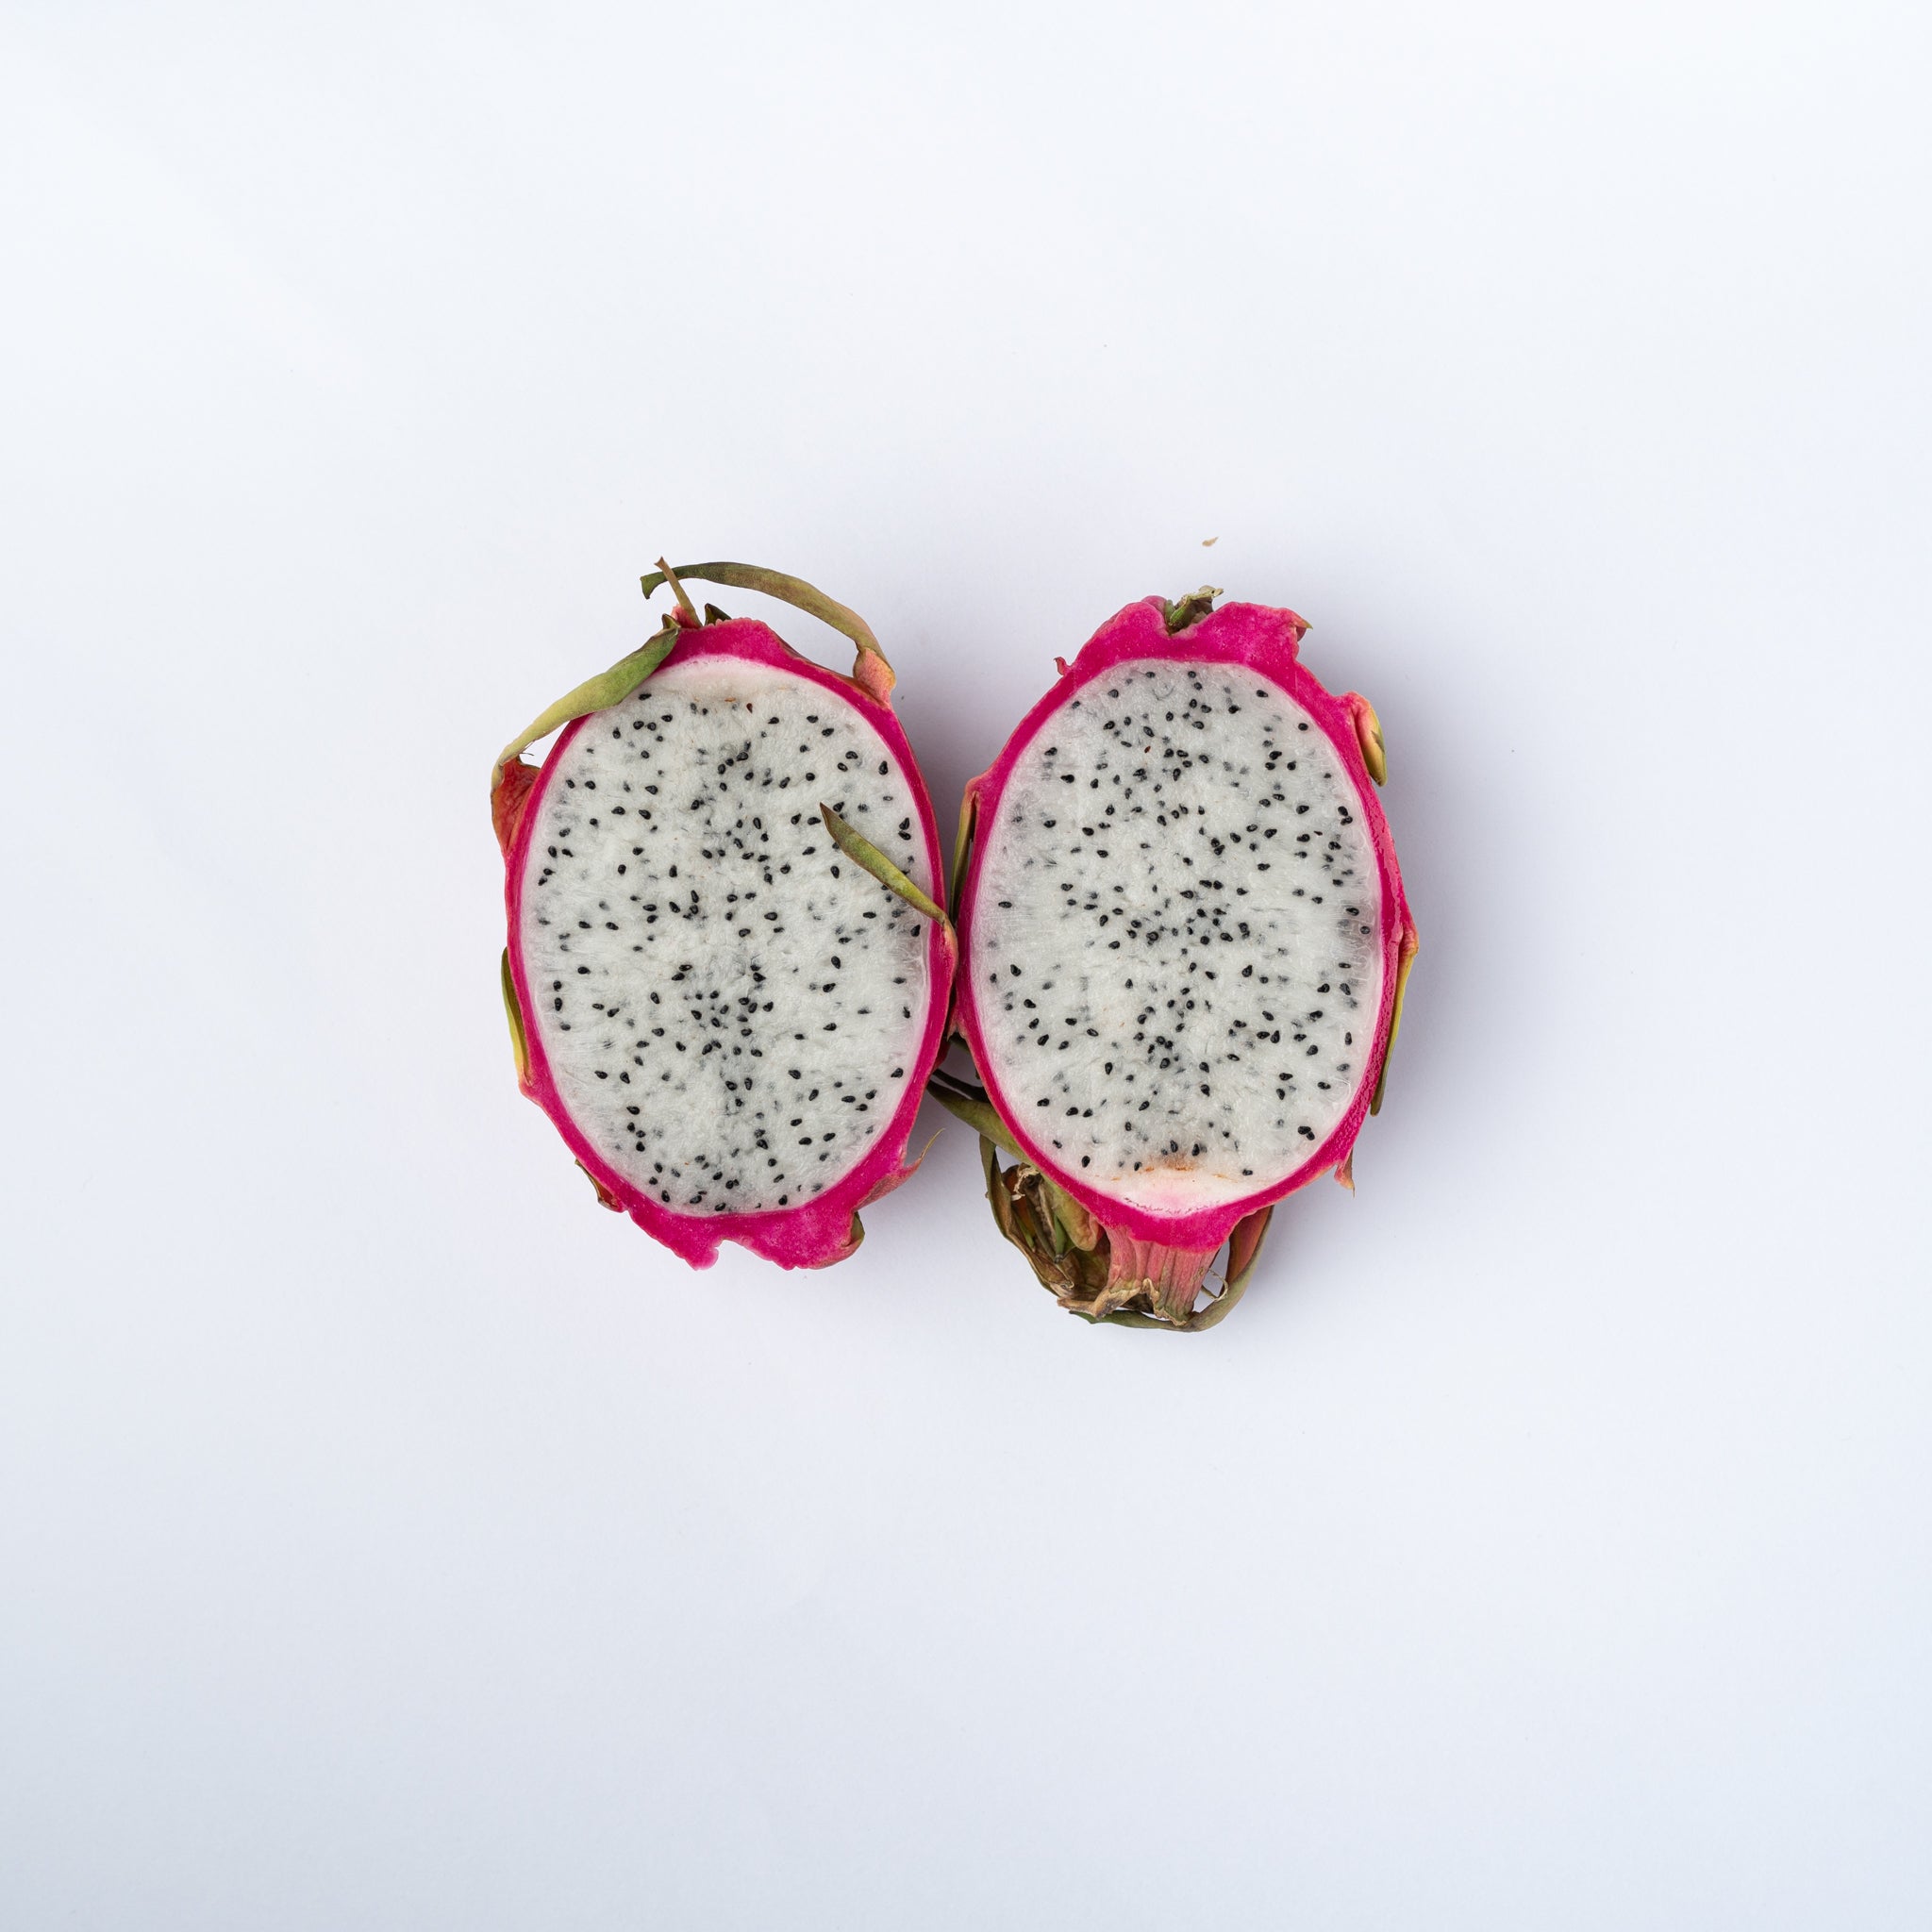 A white fleshed dragonfruit cut in two halves.